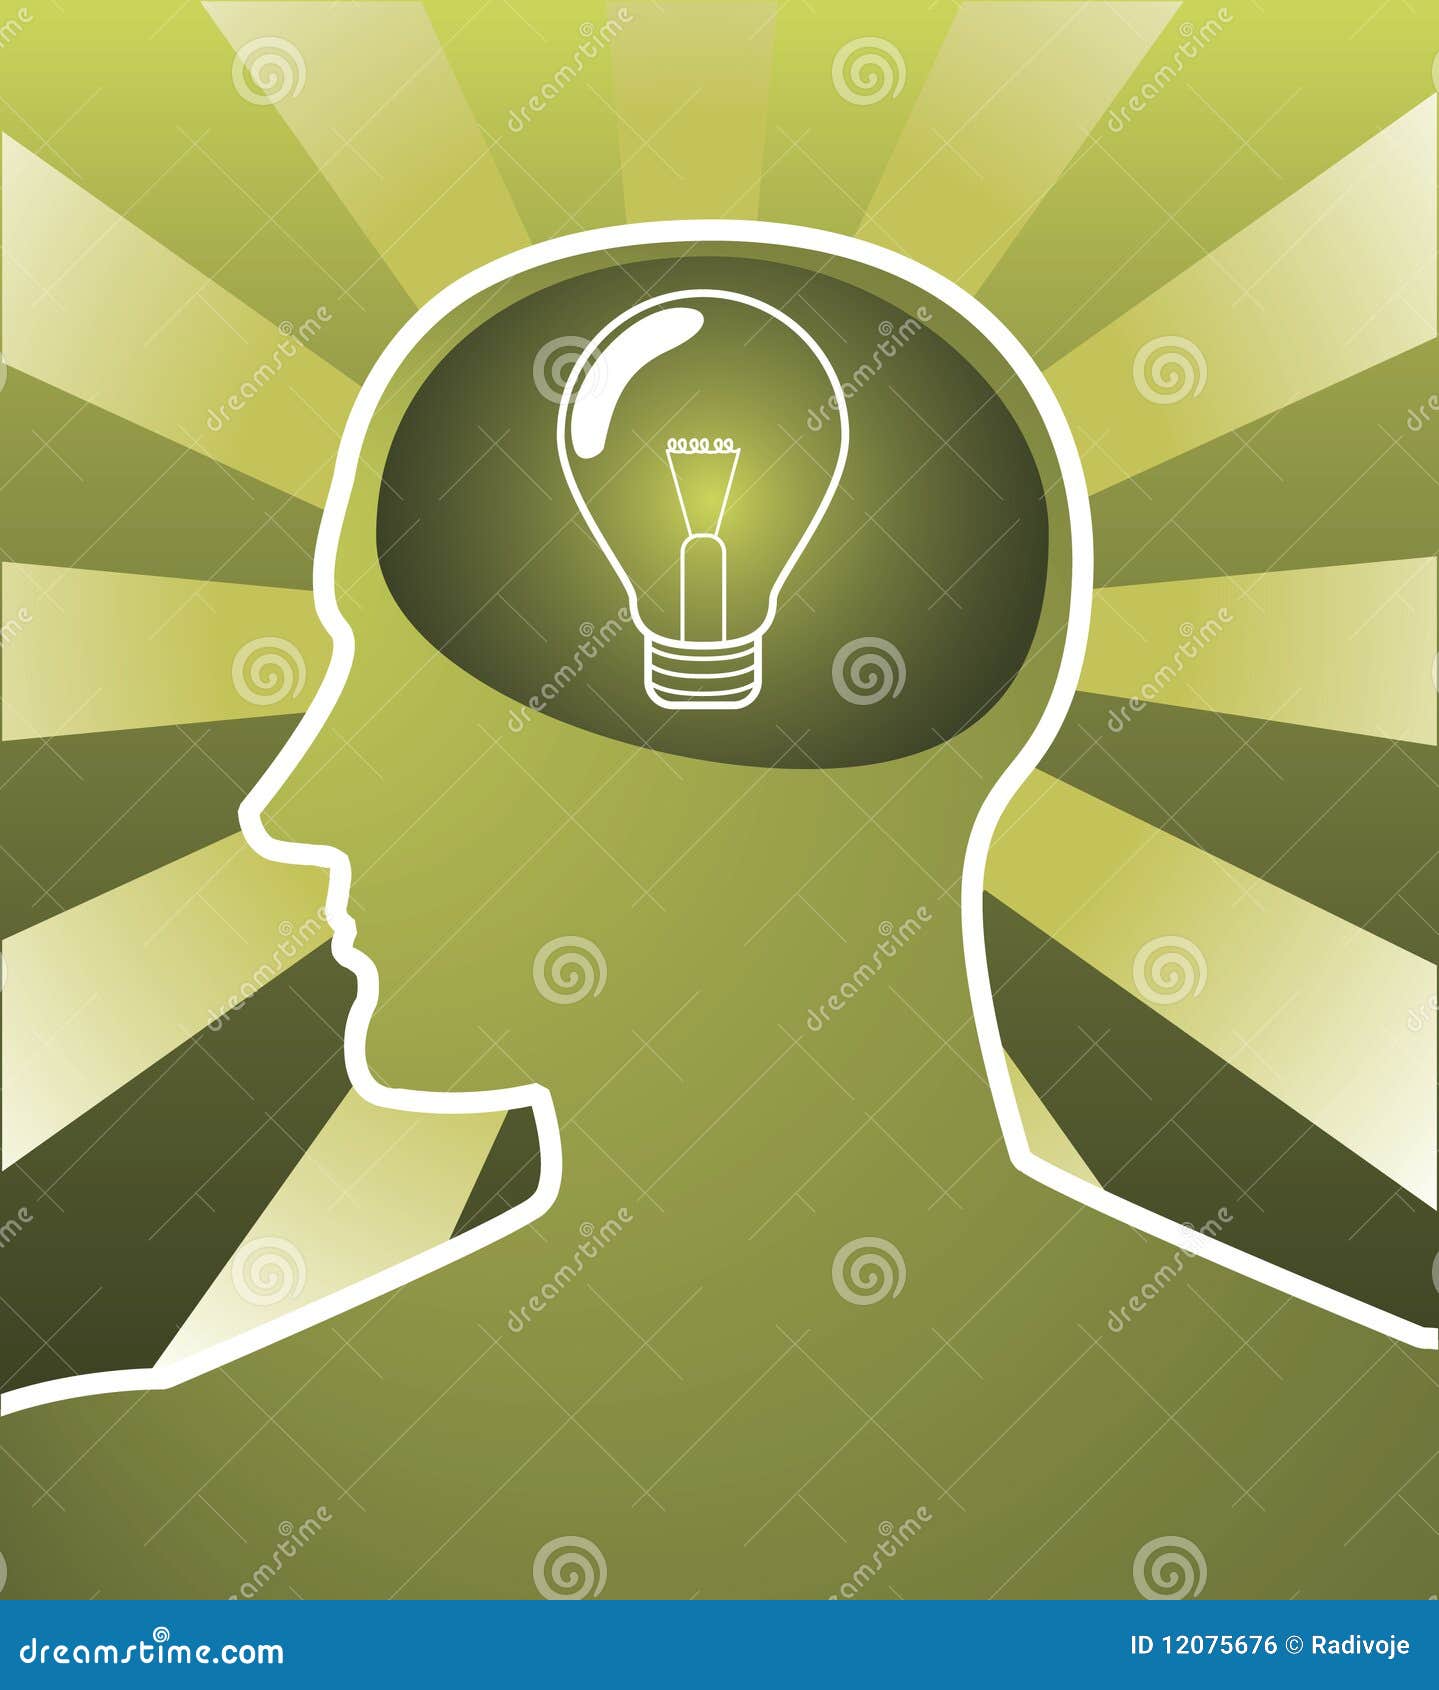 Smart thinking stock vector. Illustration of concept - 12075676